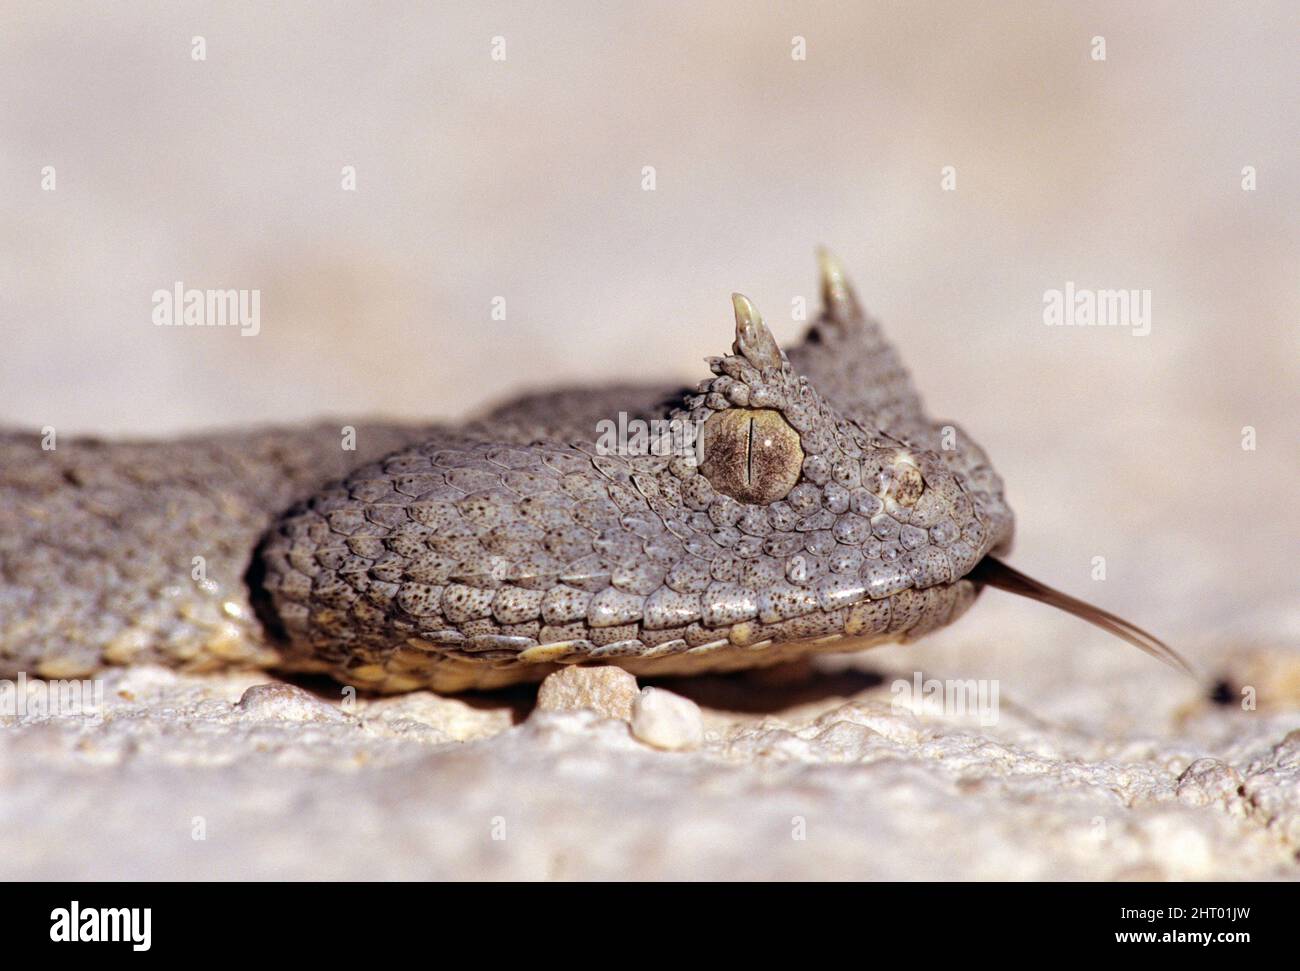 Desert horned viper (Cerastes cerastes), head showing the supraocular horns, tongue extended. Northern Africa Stock Photo